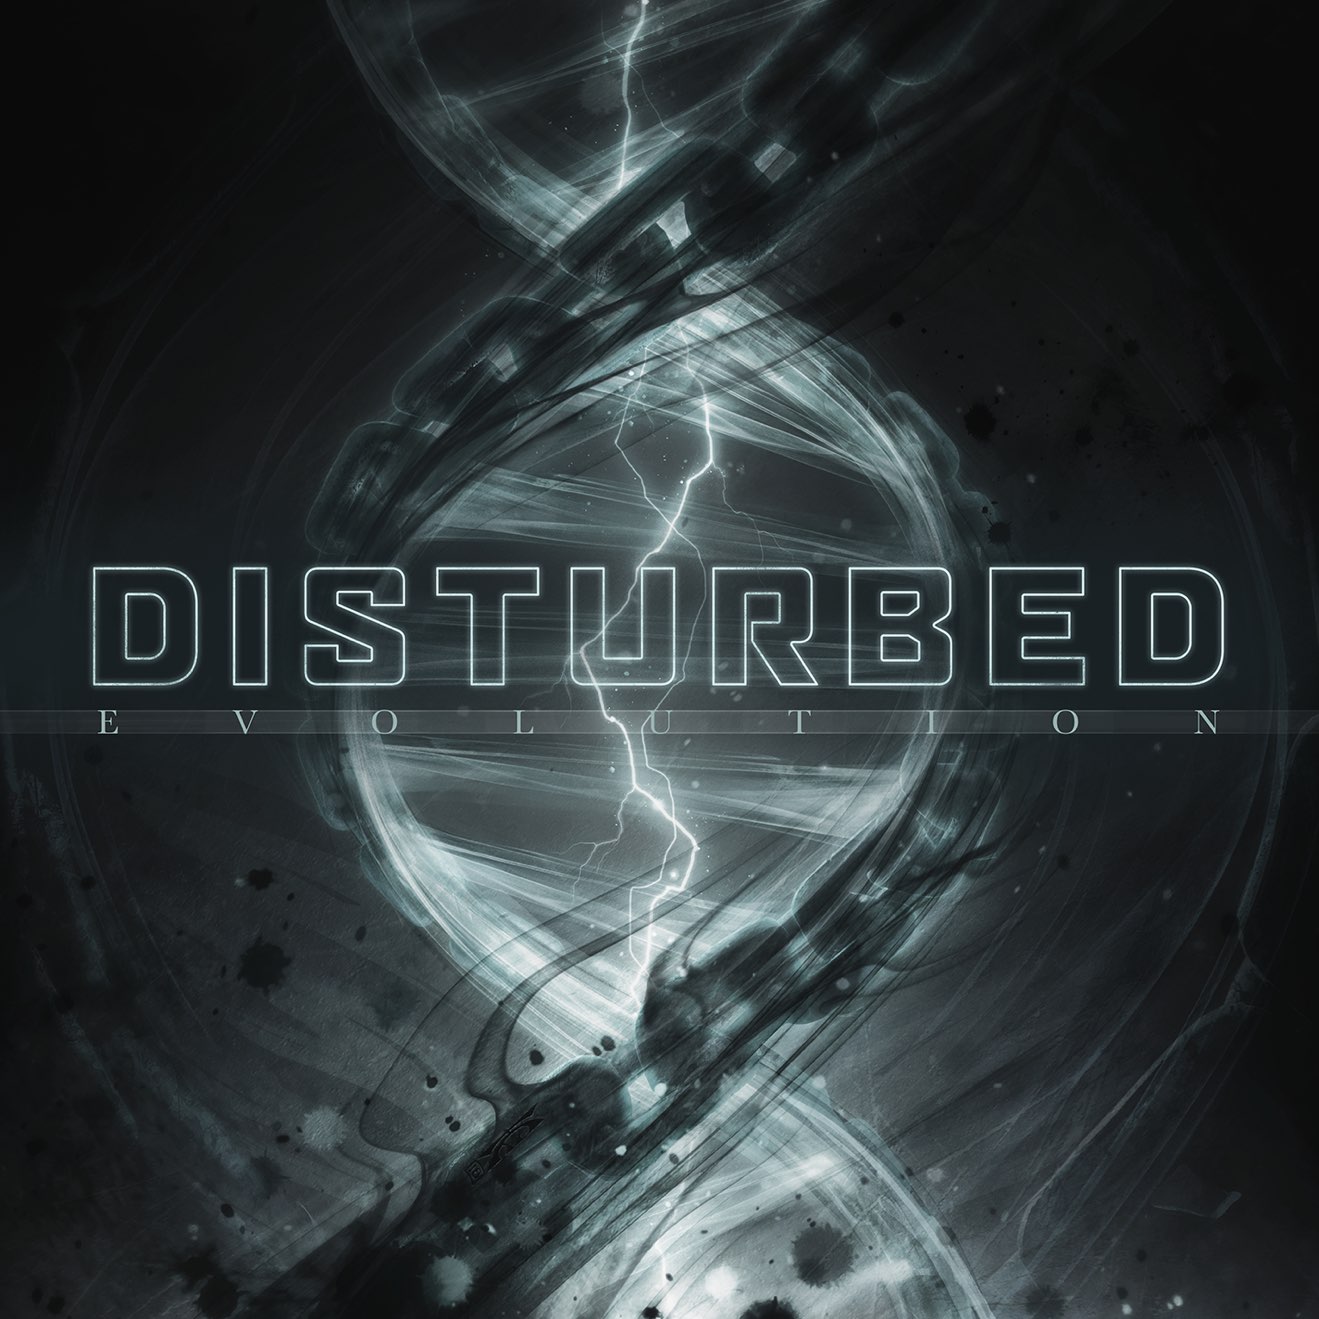 Disturbed – Evolution (Deluxe Edition) (2018) [iTunes Match M4A]